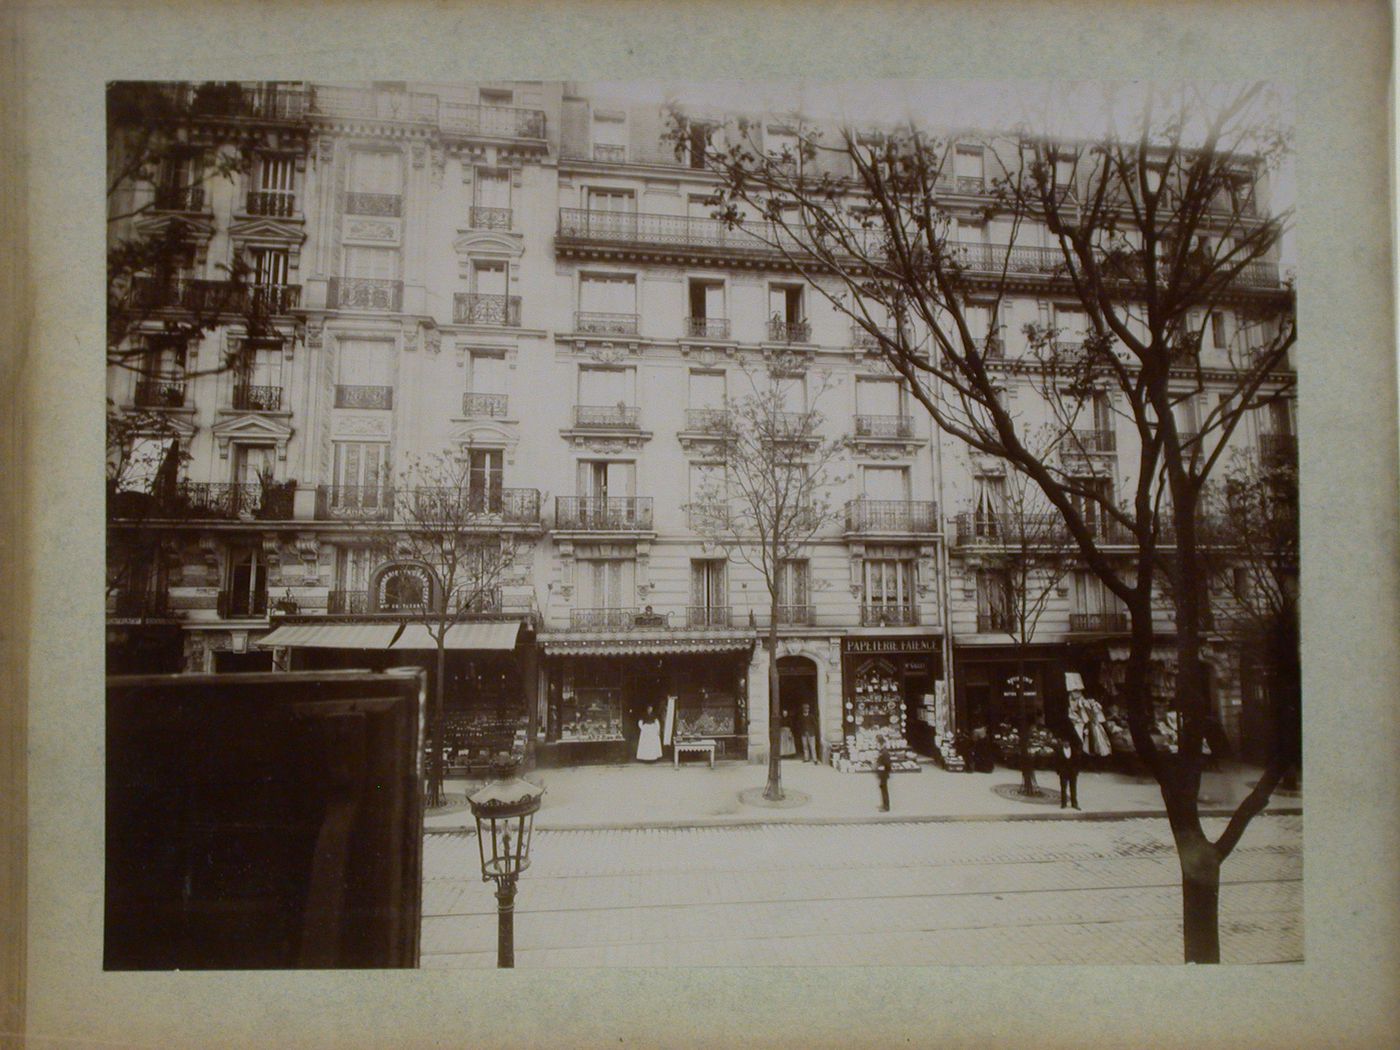 View across a street looking towards stores and apartment houses, Paris, France